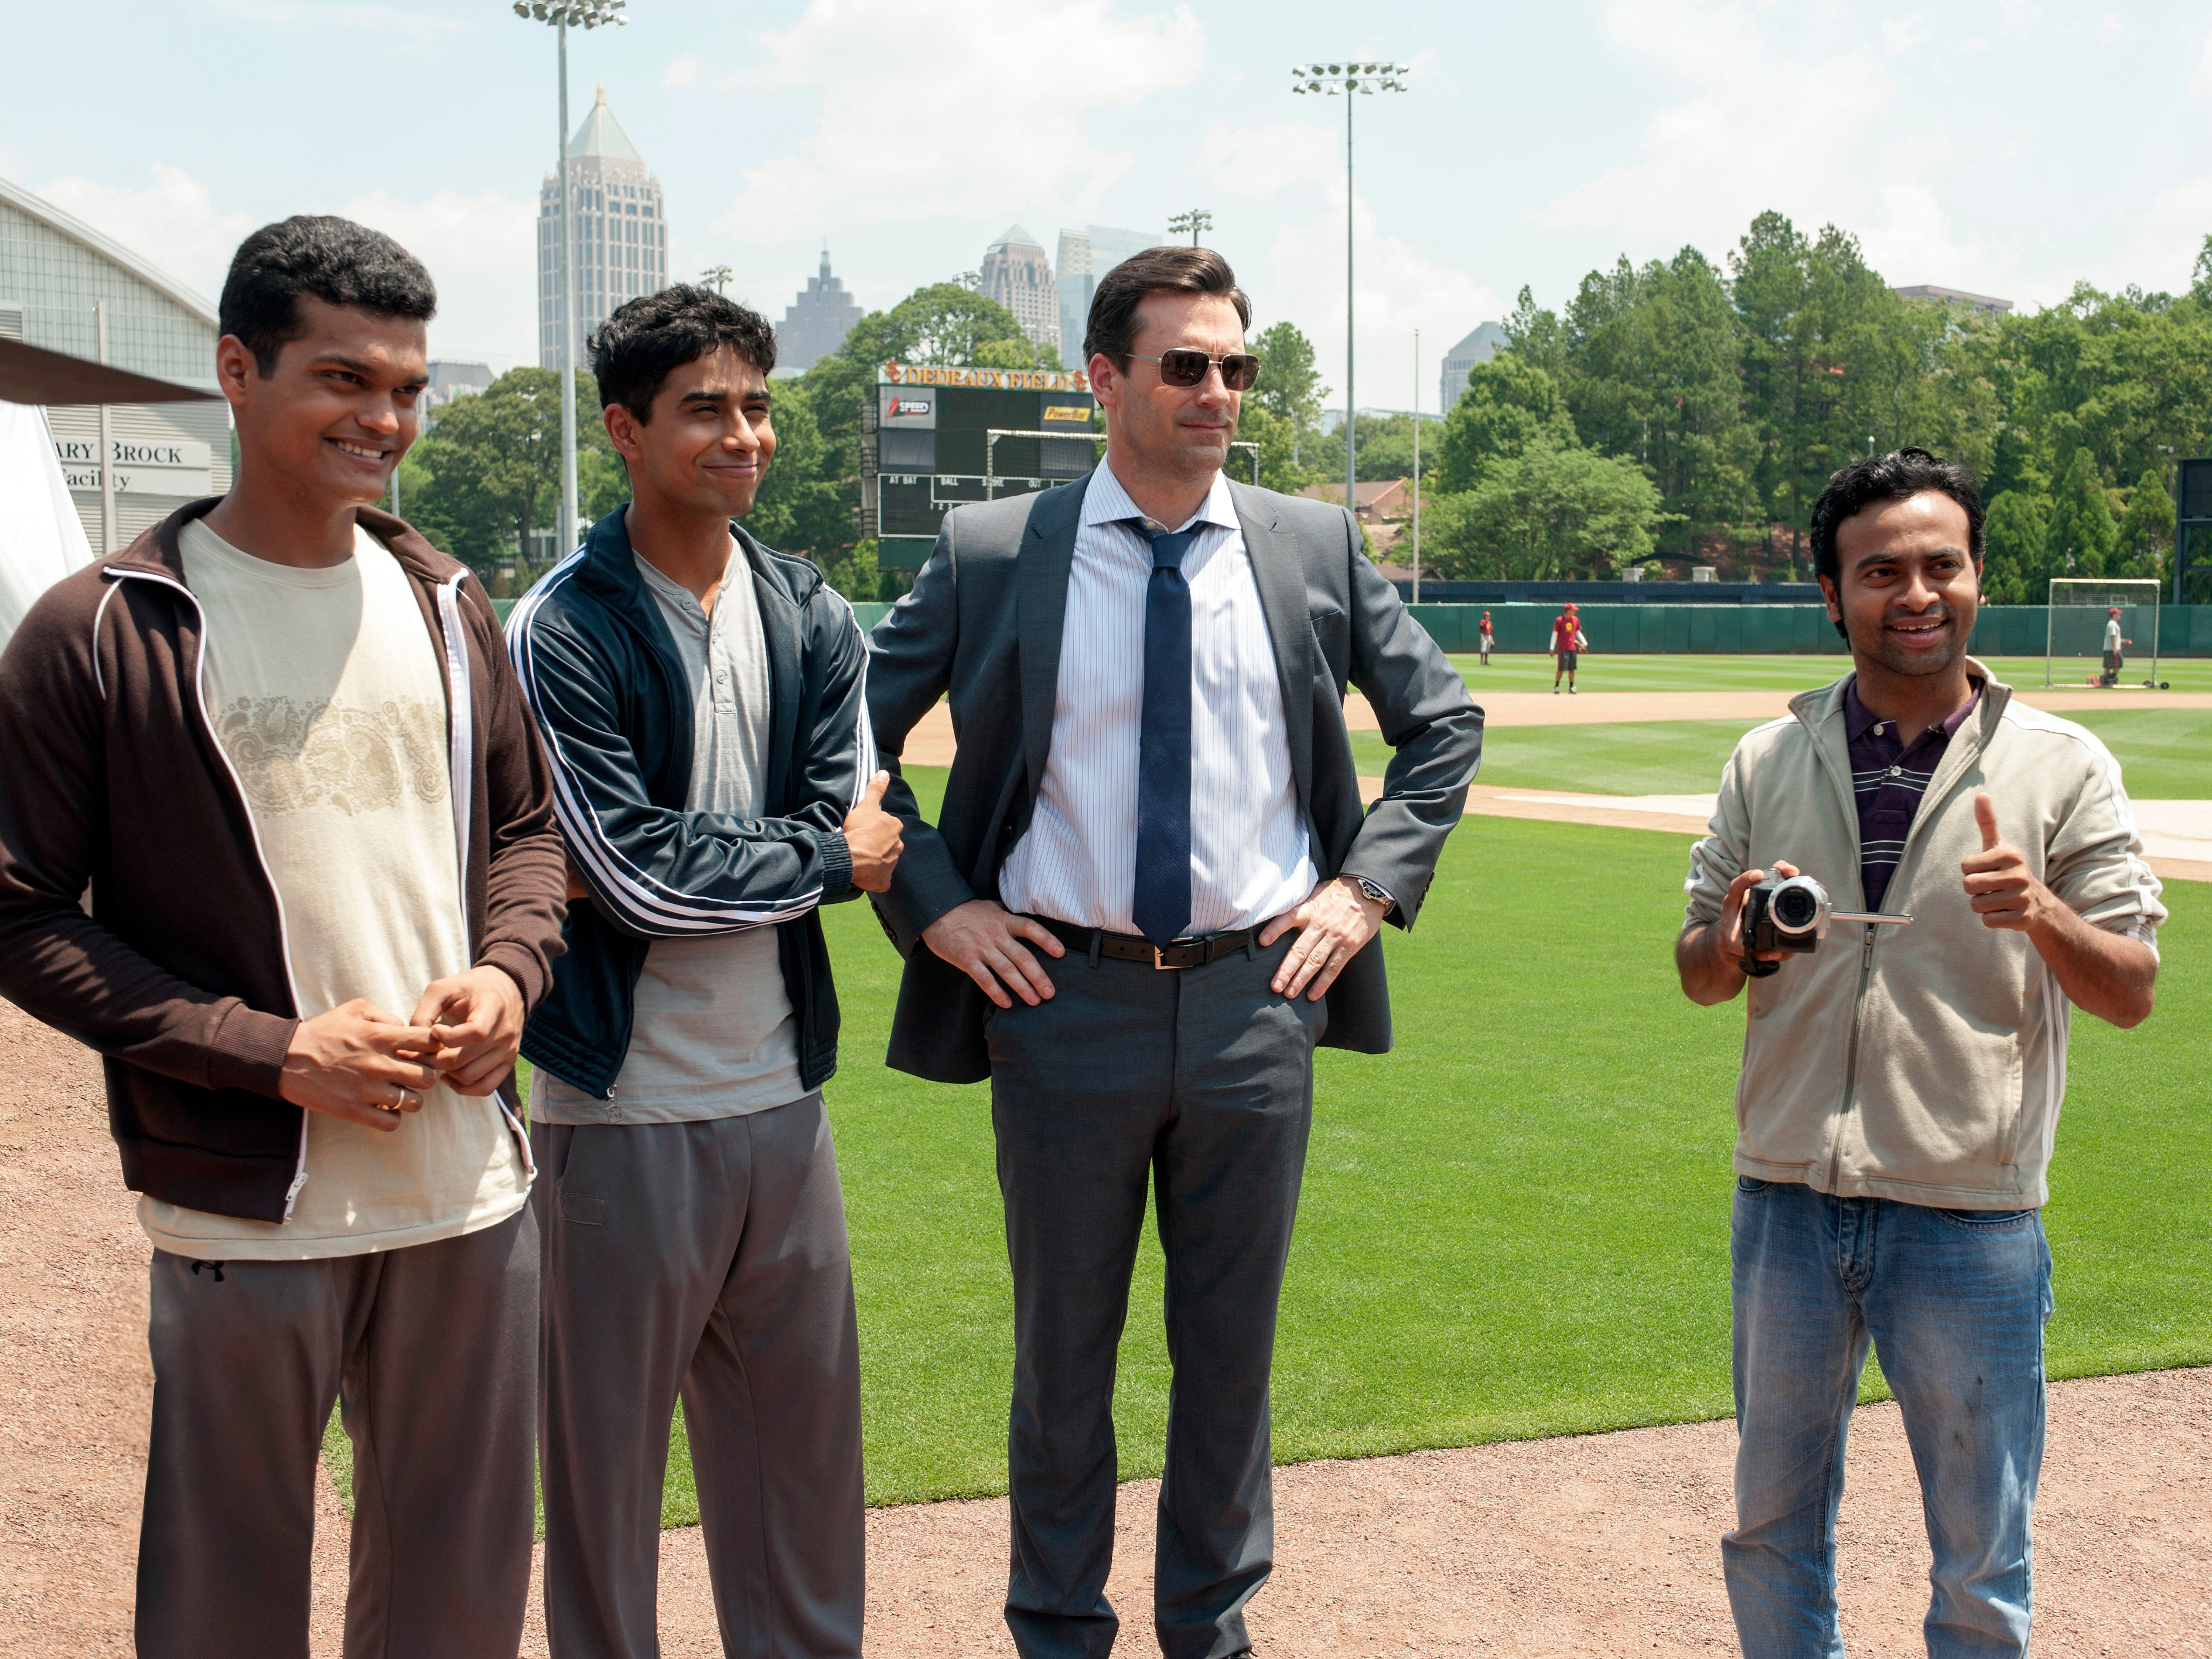 Actor Jon Hamm: Hamm about The Simmons and Hamm at The Cardinals